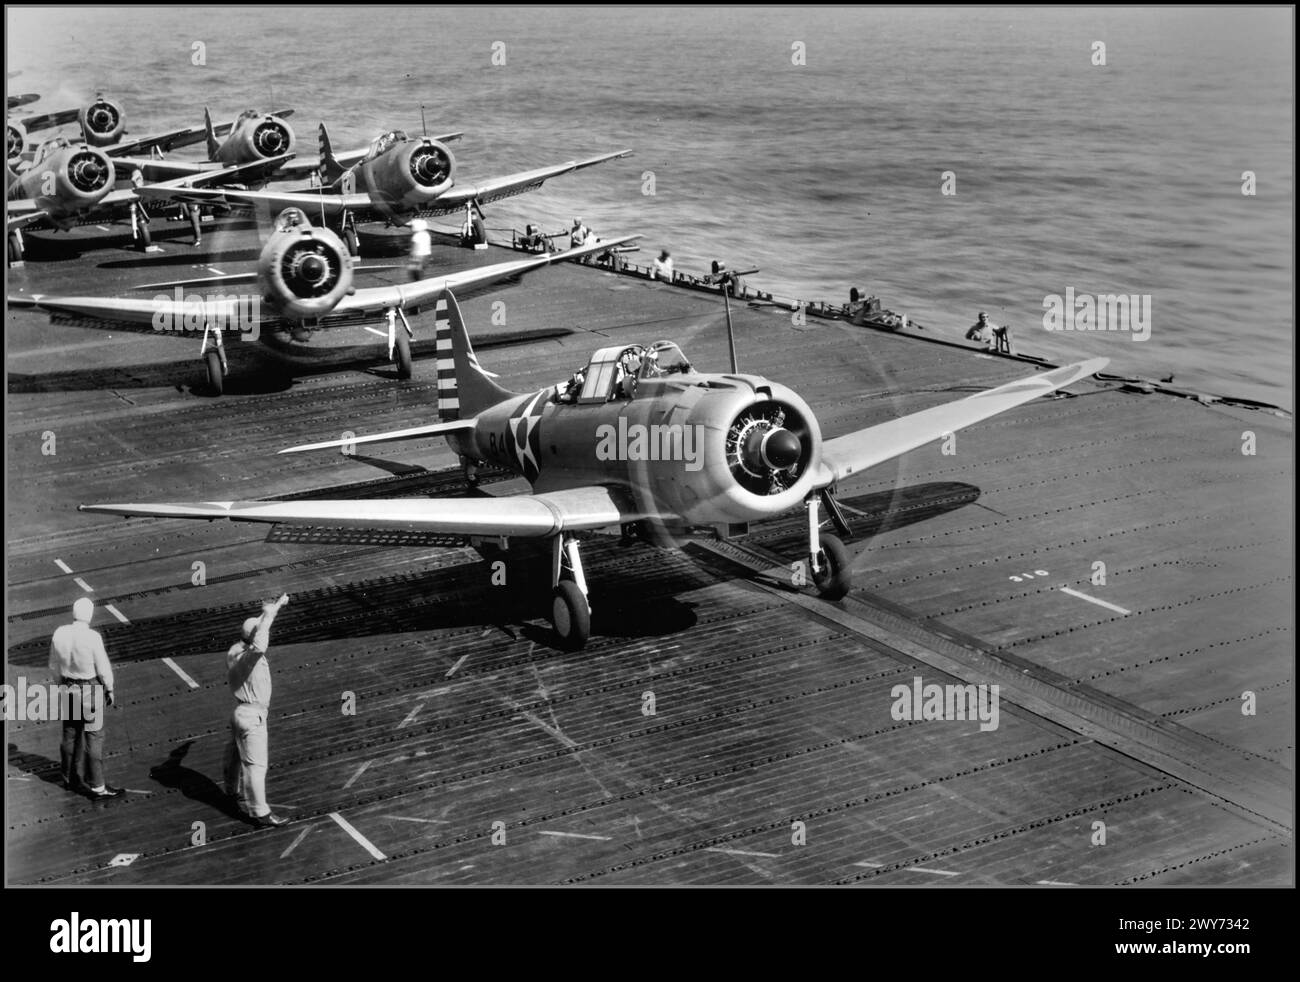 WW2 American dive bombers Douglas SBD-3 Dauntless from the 6th Bomb Squadron (Bombing Squadron 6, VB-6) are preparing to take off from the aircraft carrier USS Enterprise (CV-6) for raid on Wake Island. 1941  The second plane in the frame is the air group commander, Lieutenant Commander Howard Young. This is indicated by the designation GC (Group Commander) on the front of the engine casing. The Battle of Wake Island was a battle of the Pacific campaign of World War II, fought on Wake Island. Dates: 8 Dec 1941 – 23 Dec 1941 Stock Photo